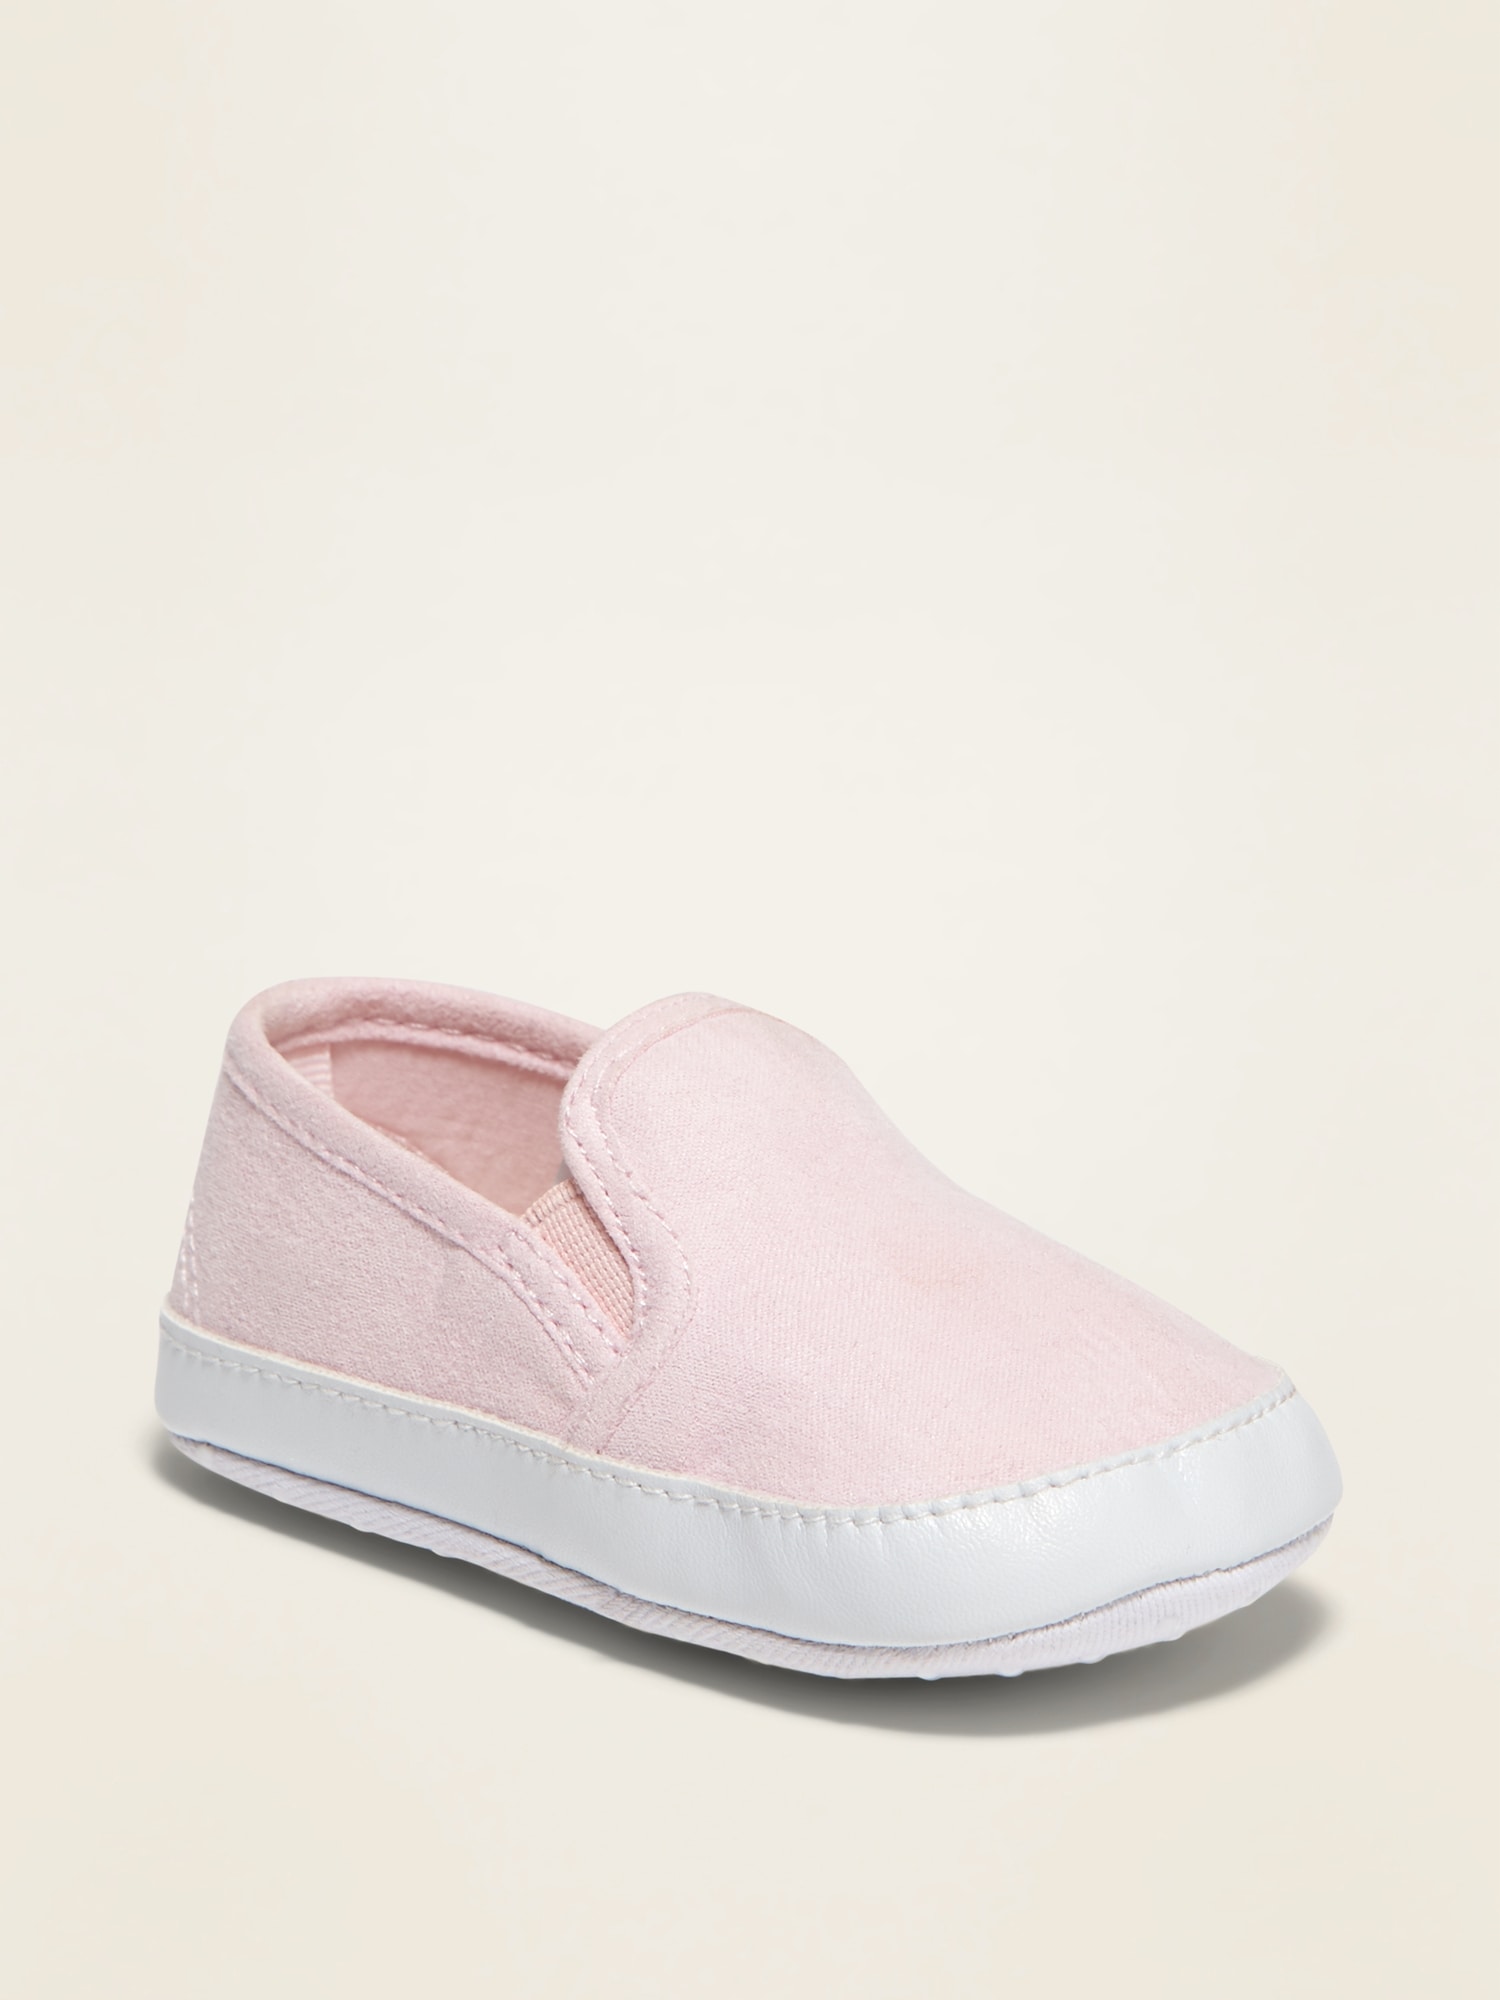 Unisex Faux-Suede Slip-Ons For Baby | Old Navy